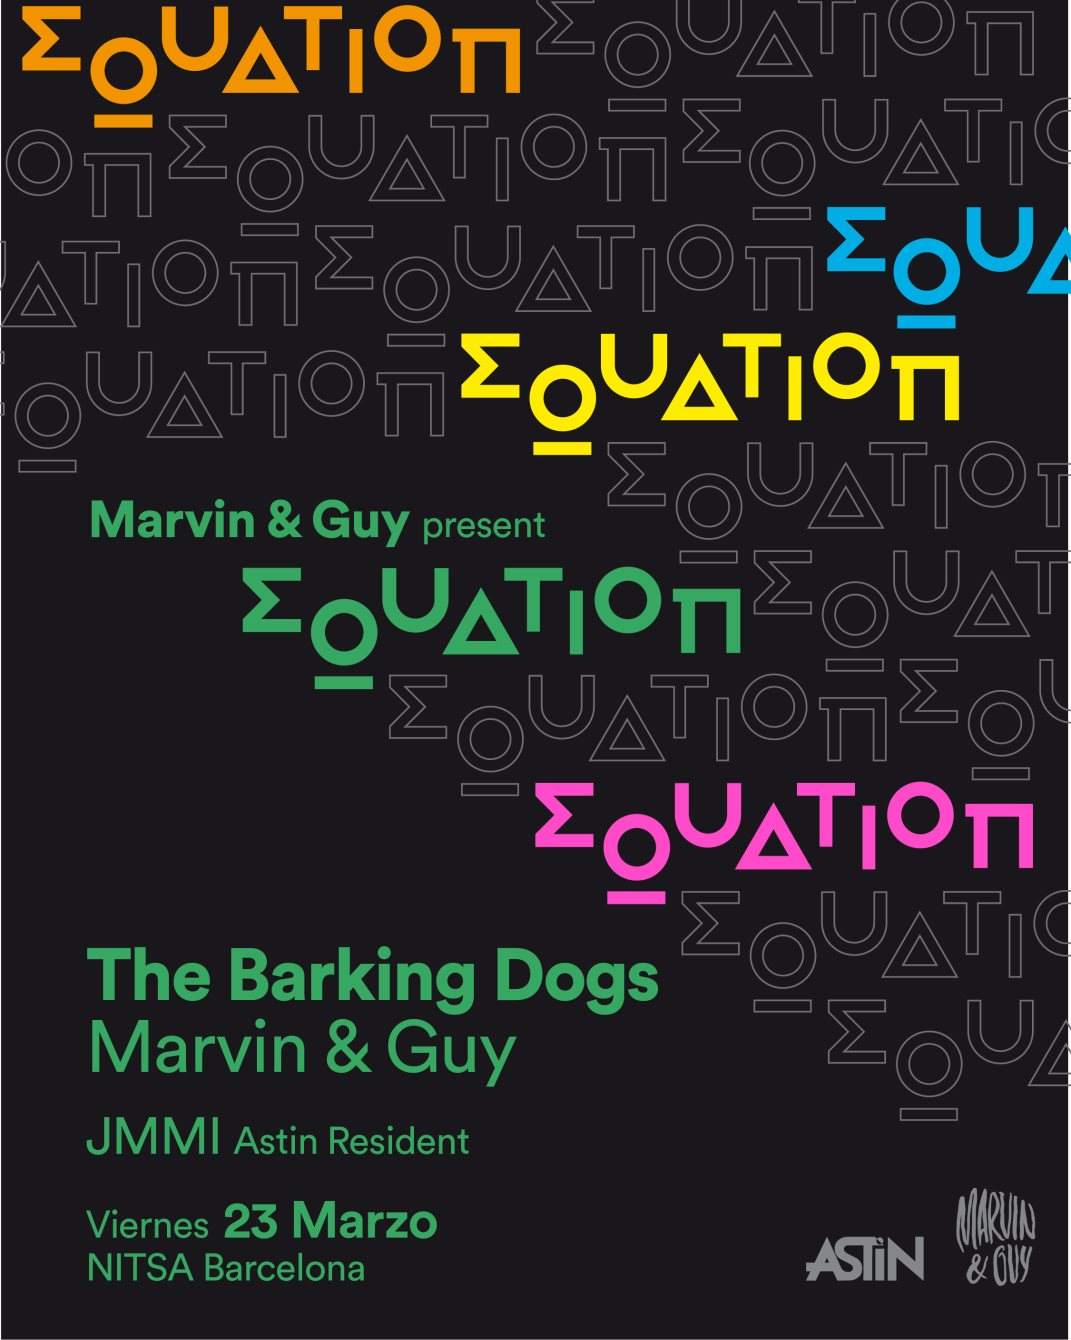 Equation 2 with The Barking Dogs - presented by Marvin & Guy - Página trasera